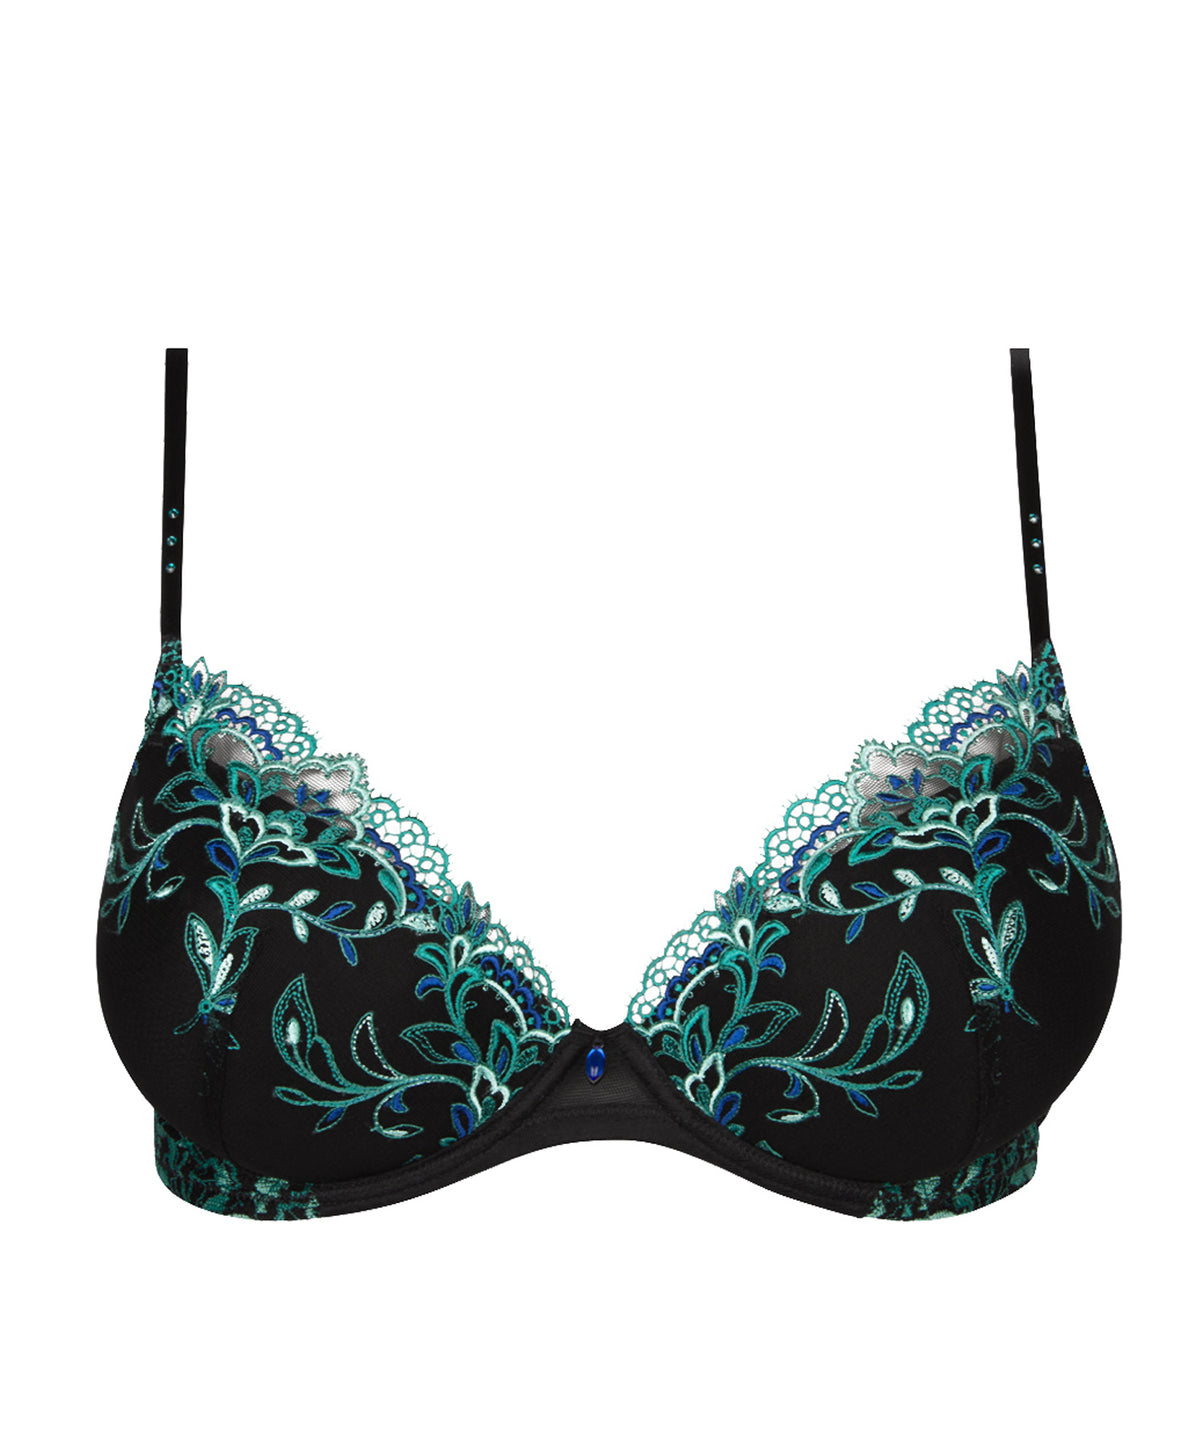 Size 34b bra emerald green and black - $6 - From Emily